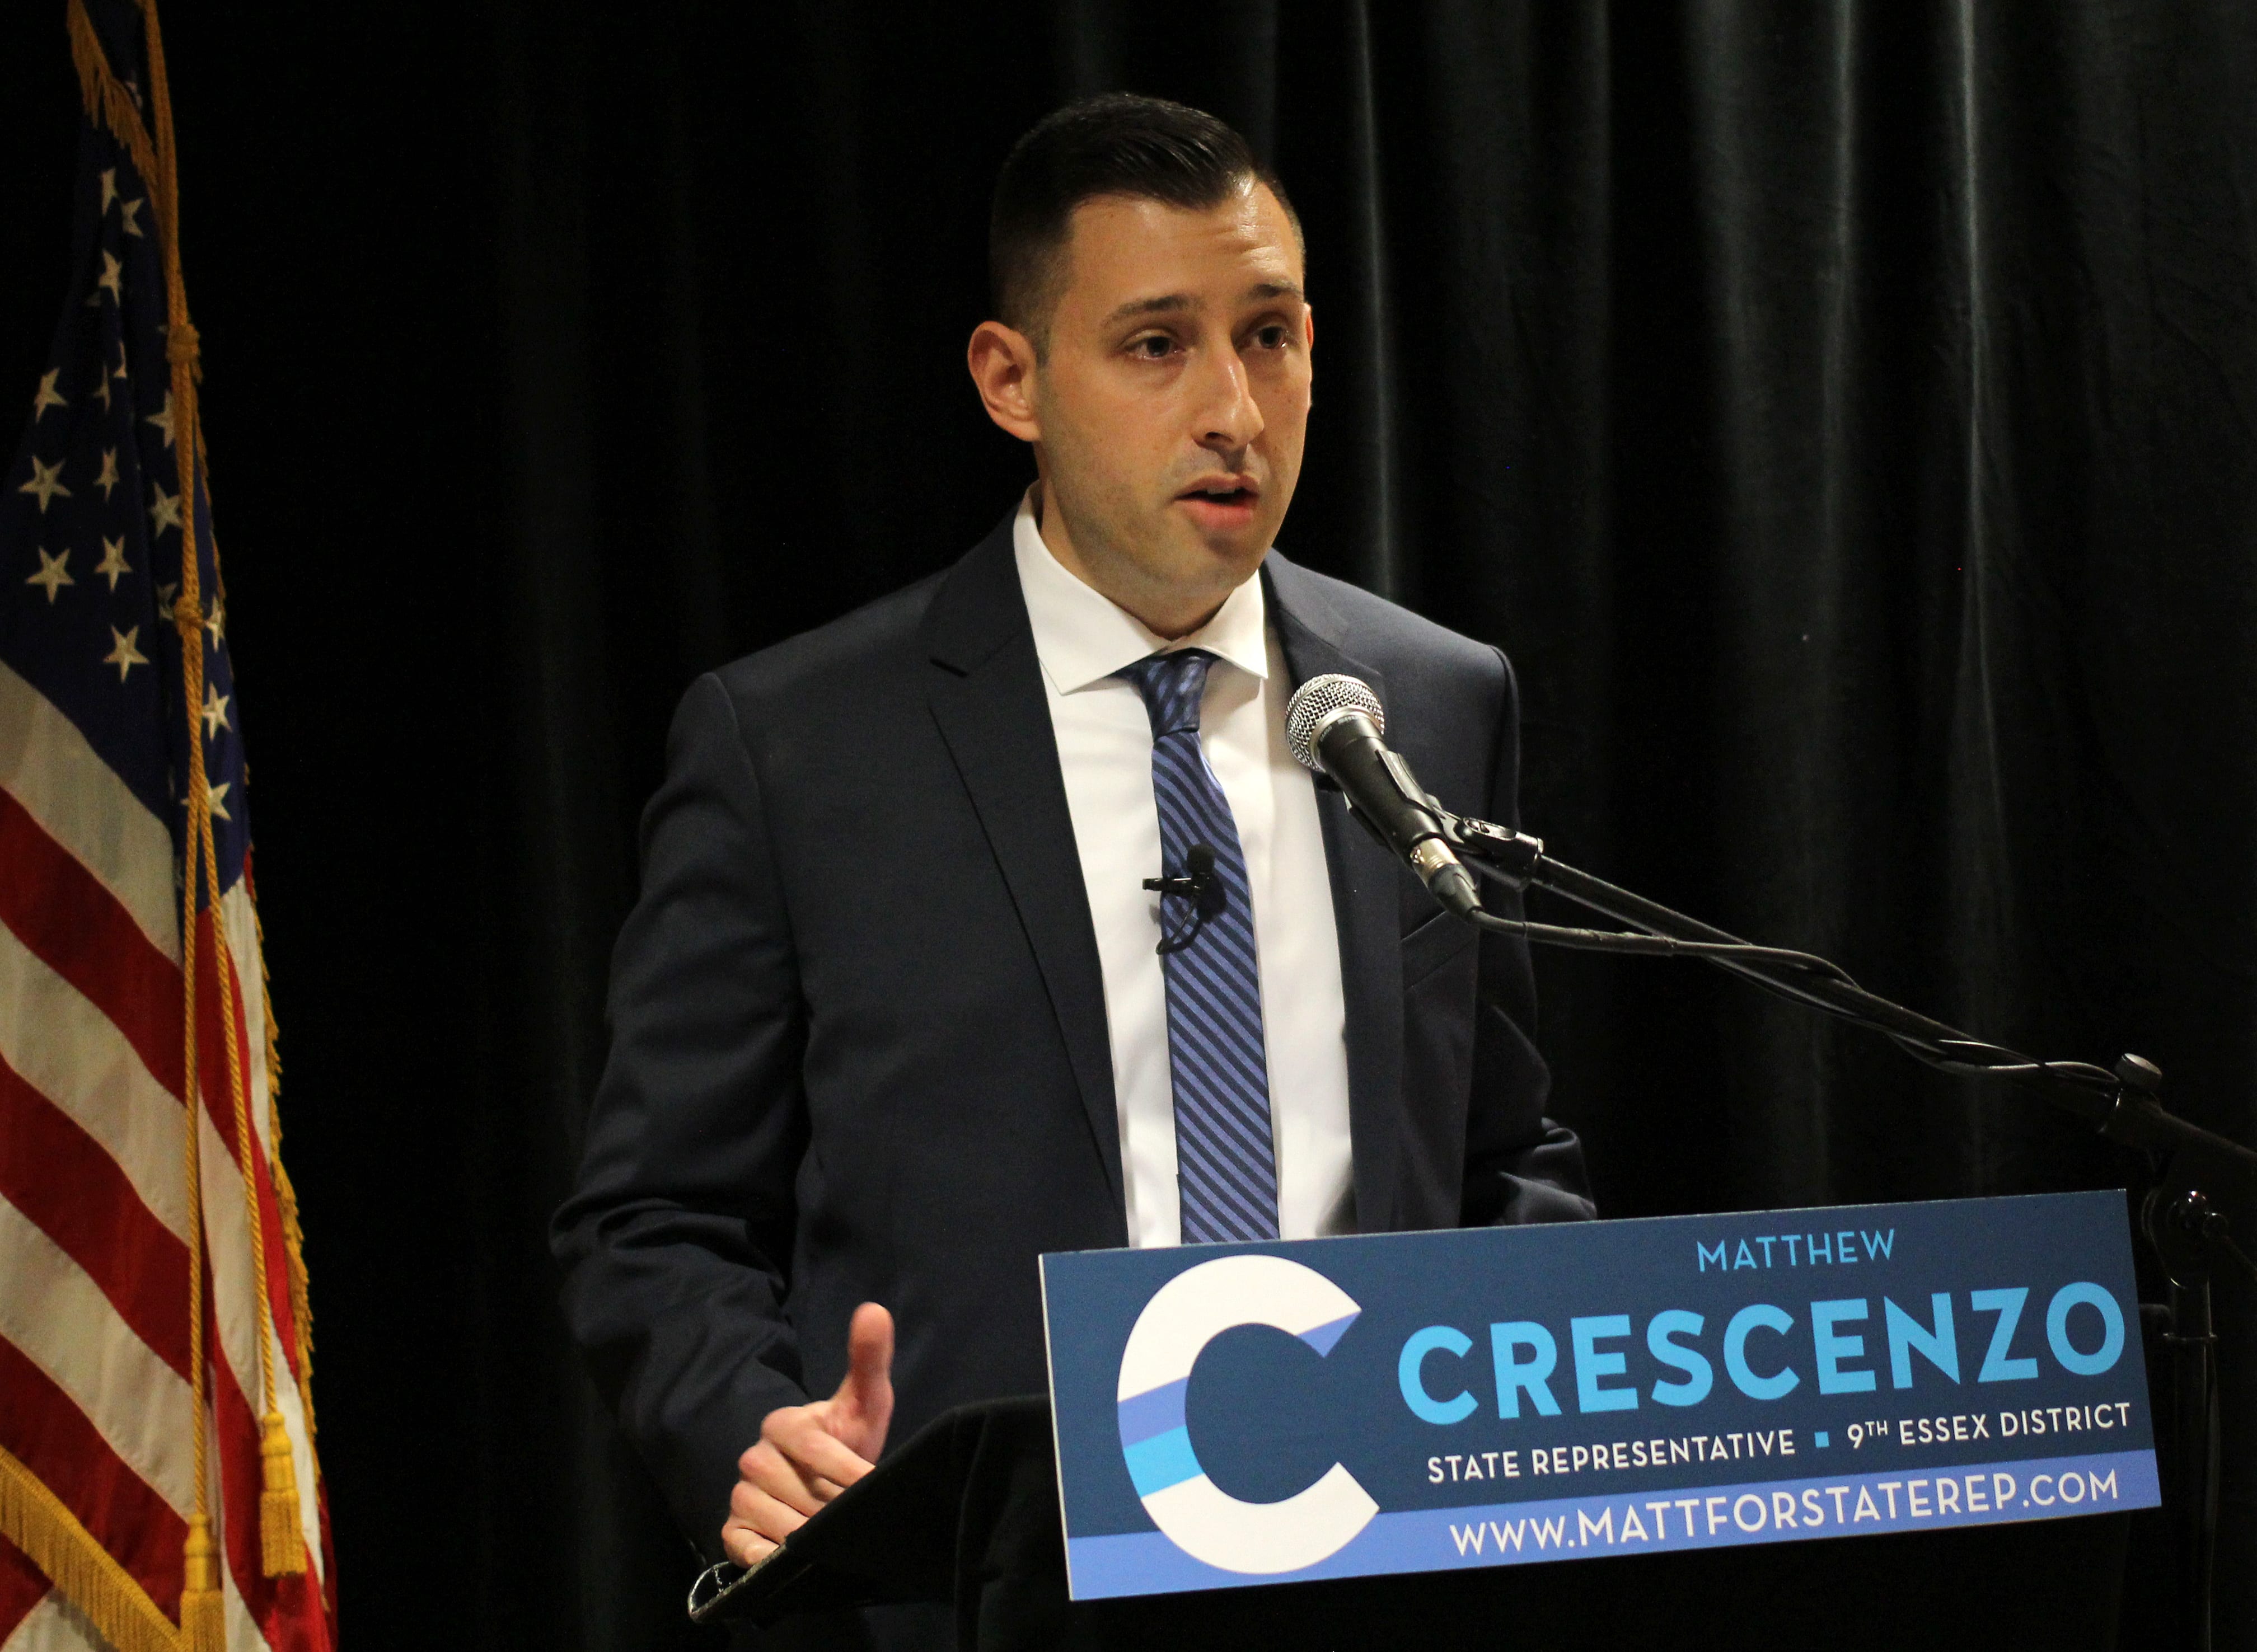 Saugus, Ma. 4-12-18. Matt Crescenzo announces his candidacy for the 9th Essex District at a press conference held at the Elks Lodge in Saugus.